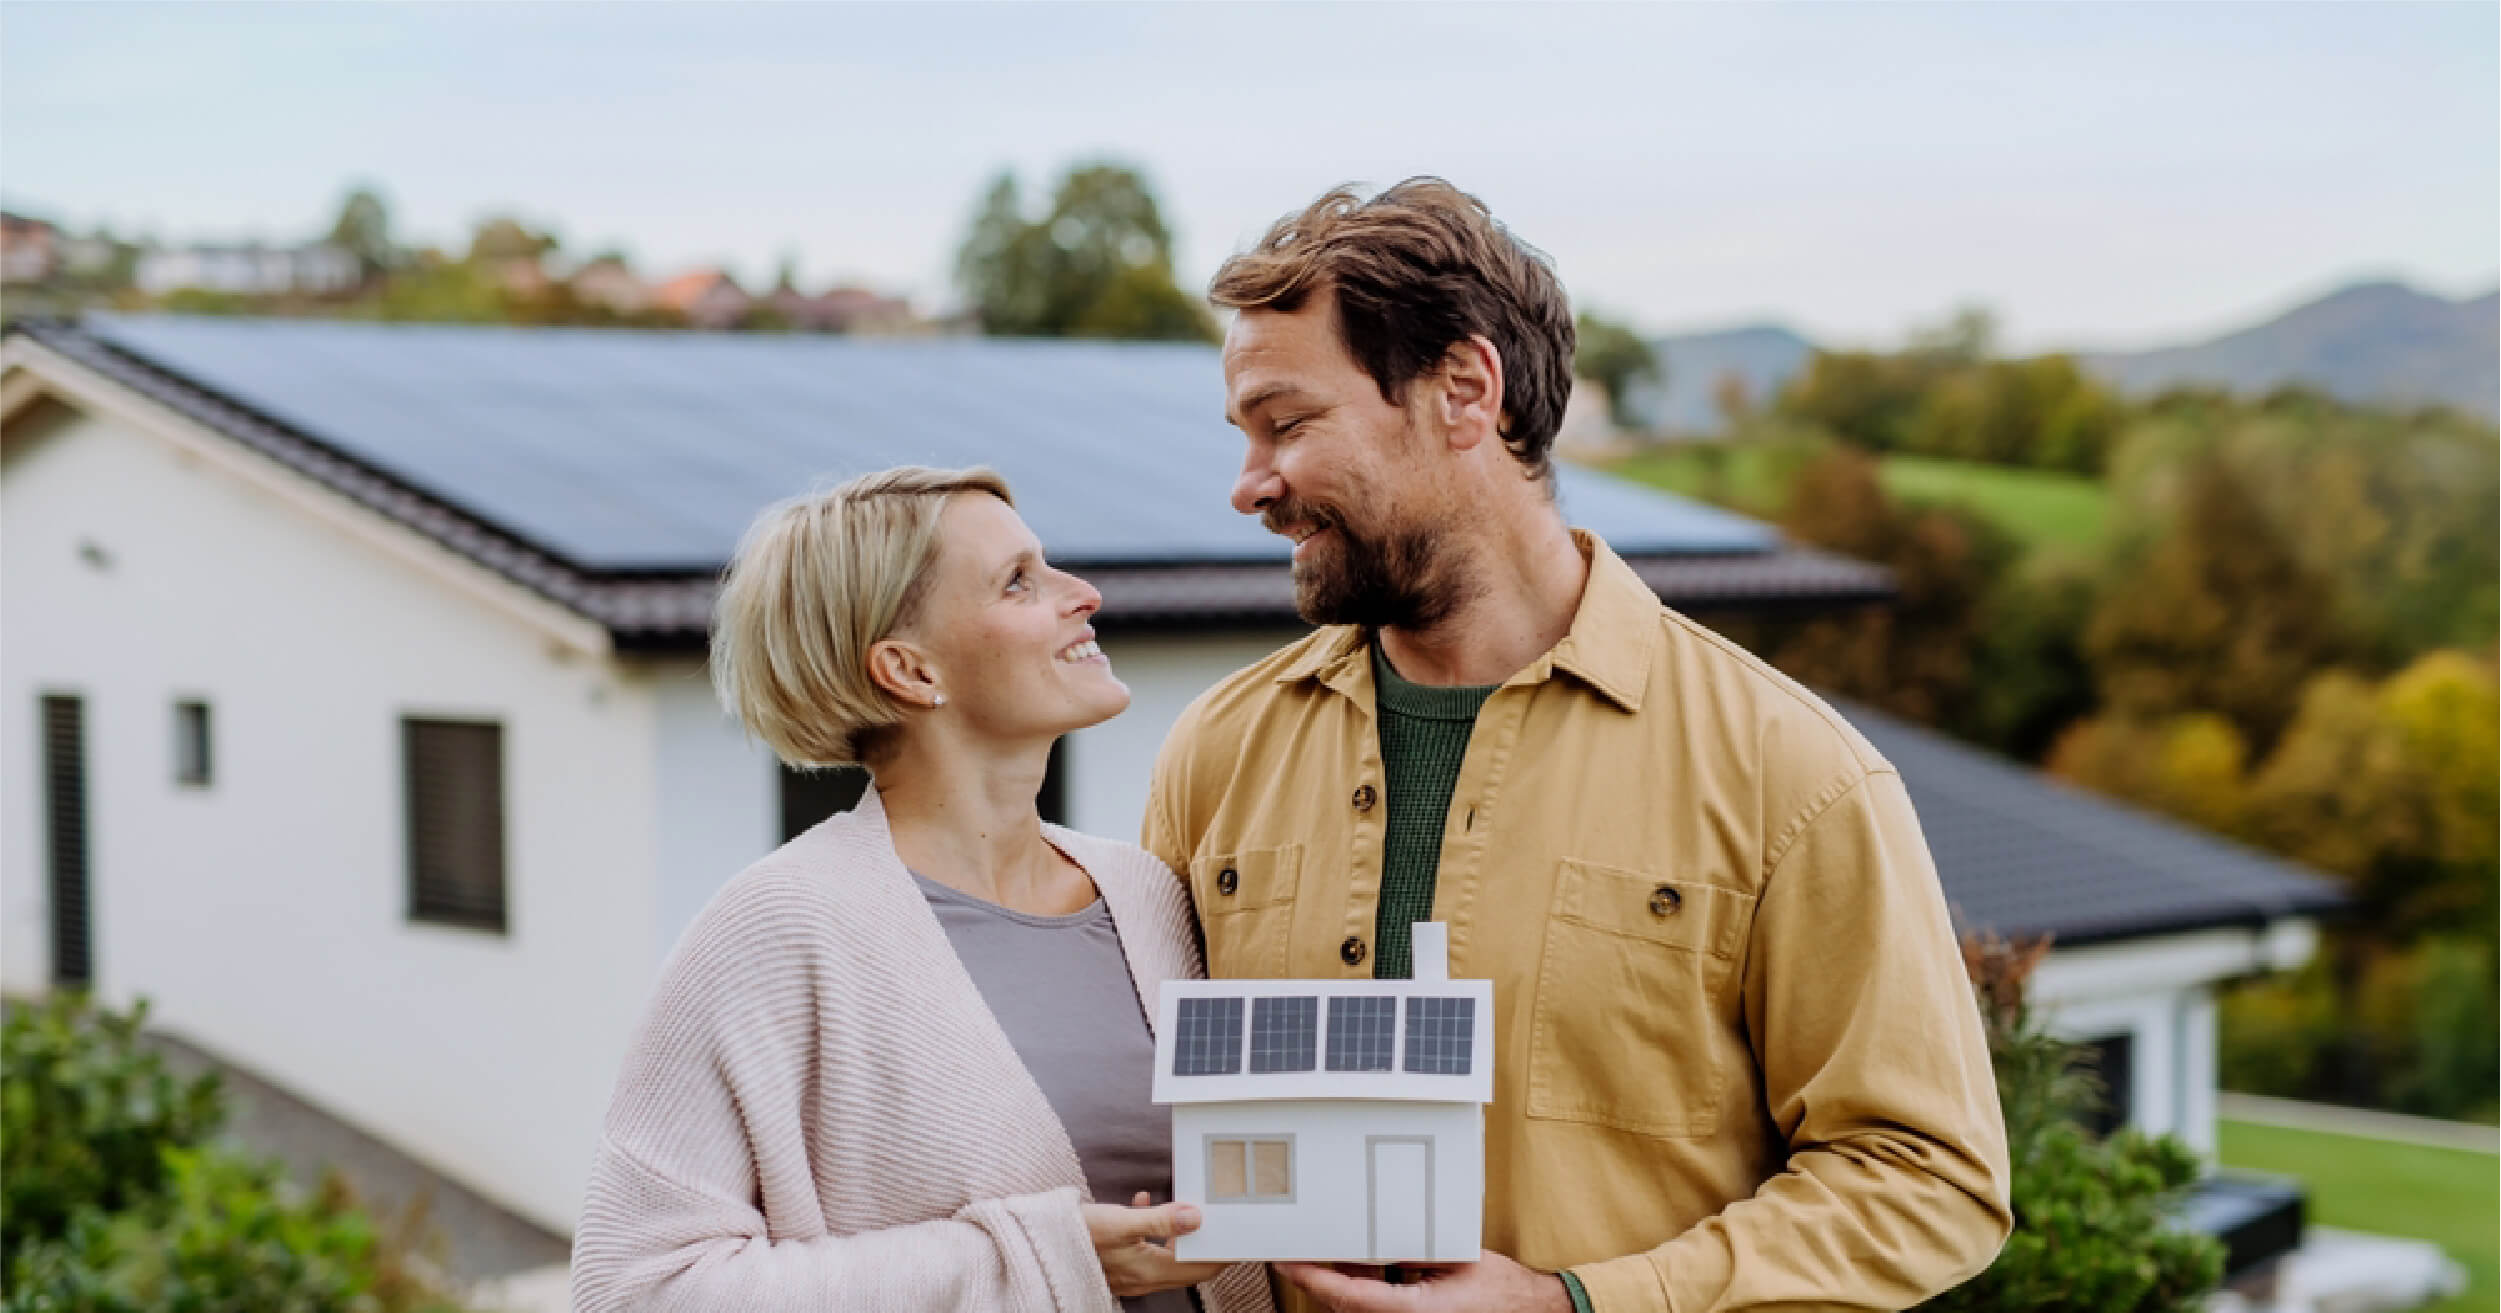 A_happy_Australian_couple_with_a_solar_energy_system_installed_in_their_home.jpg